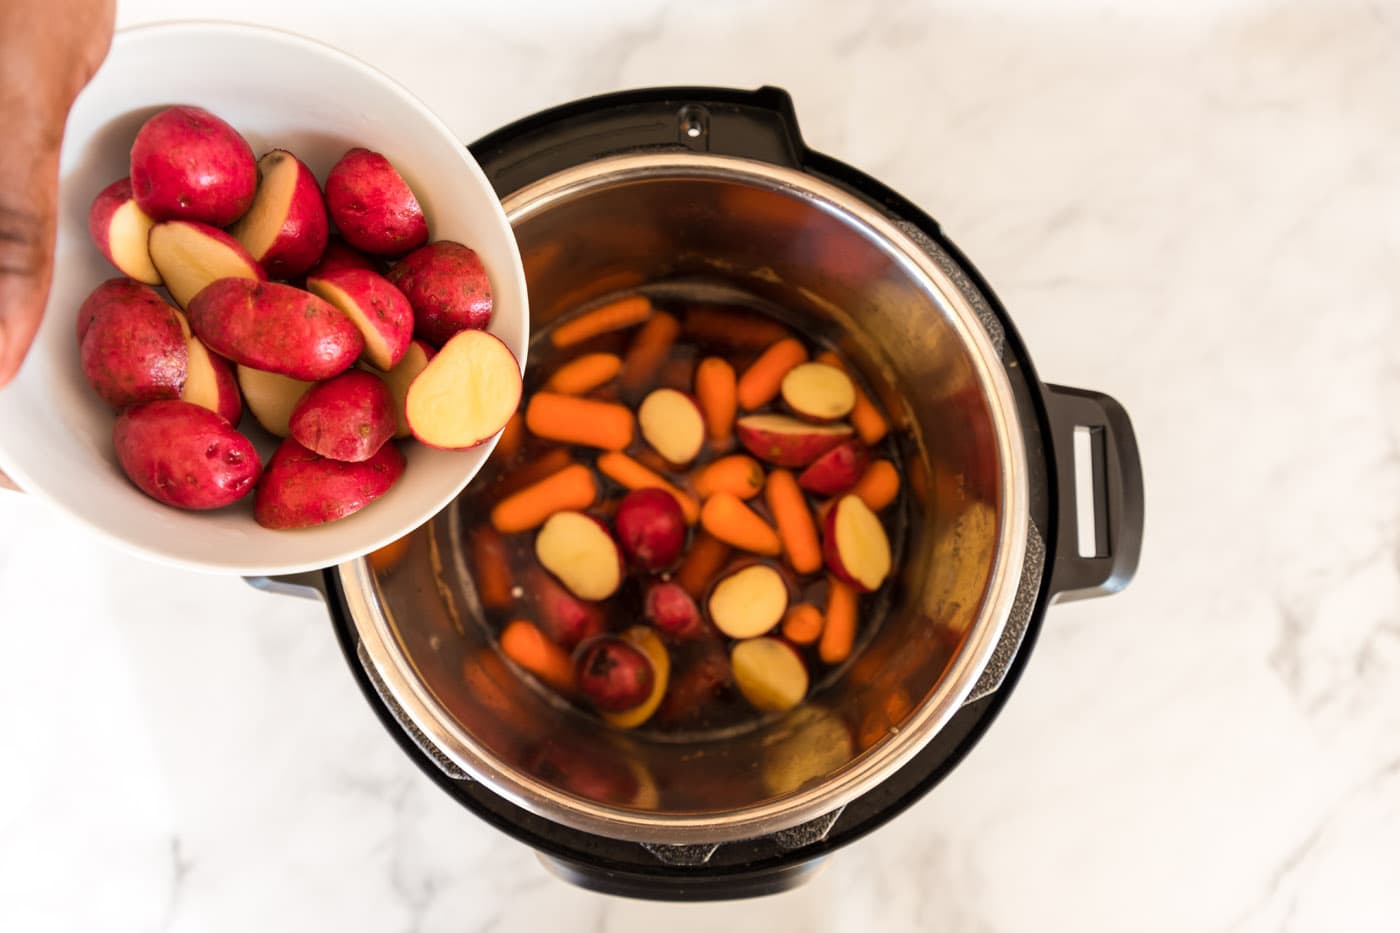 baby potatoes and carrots in instant pot